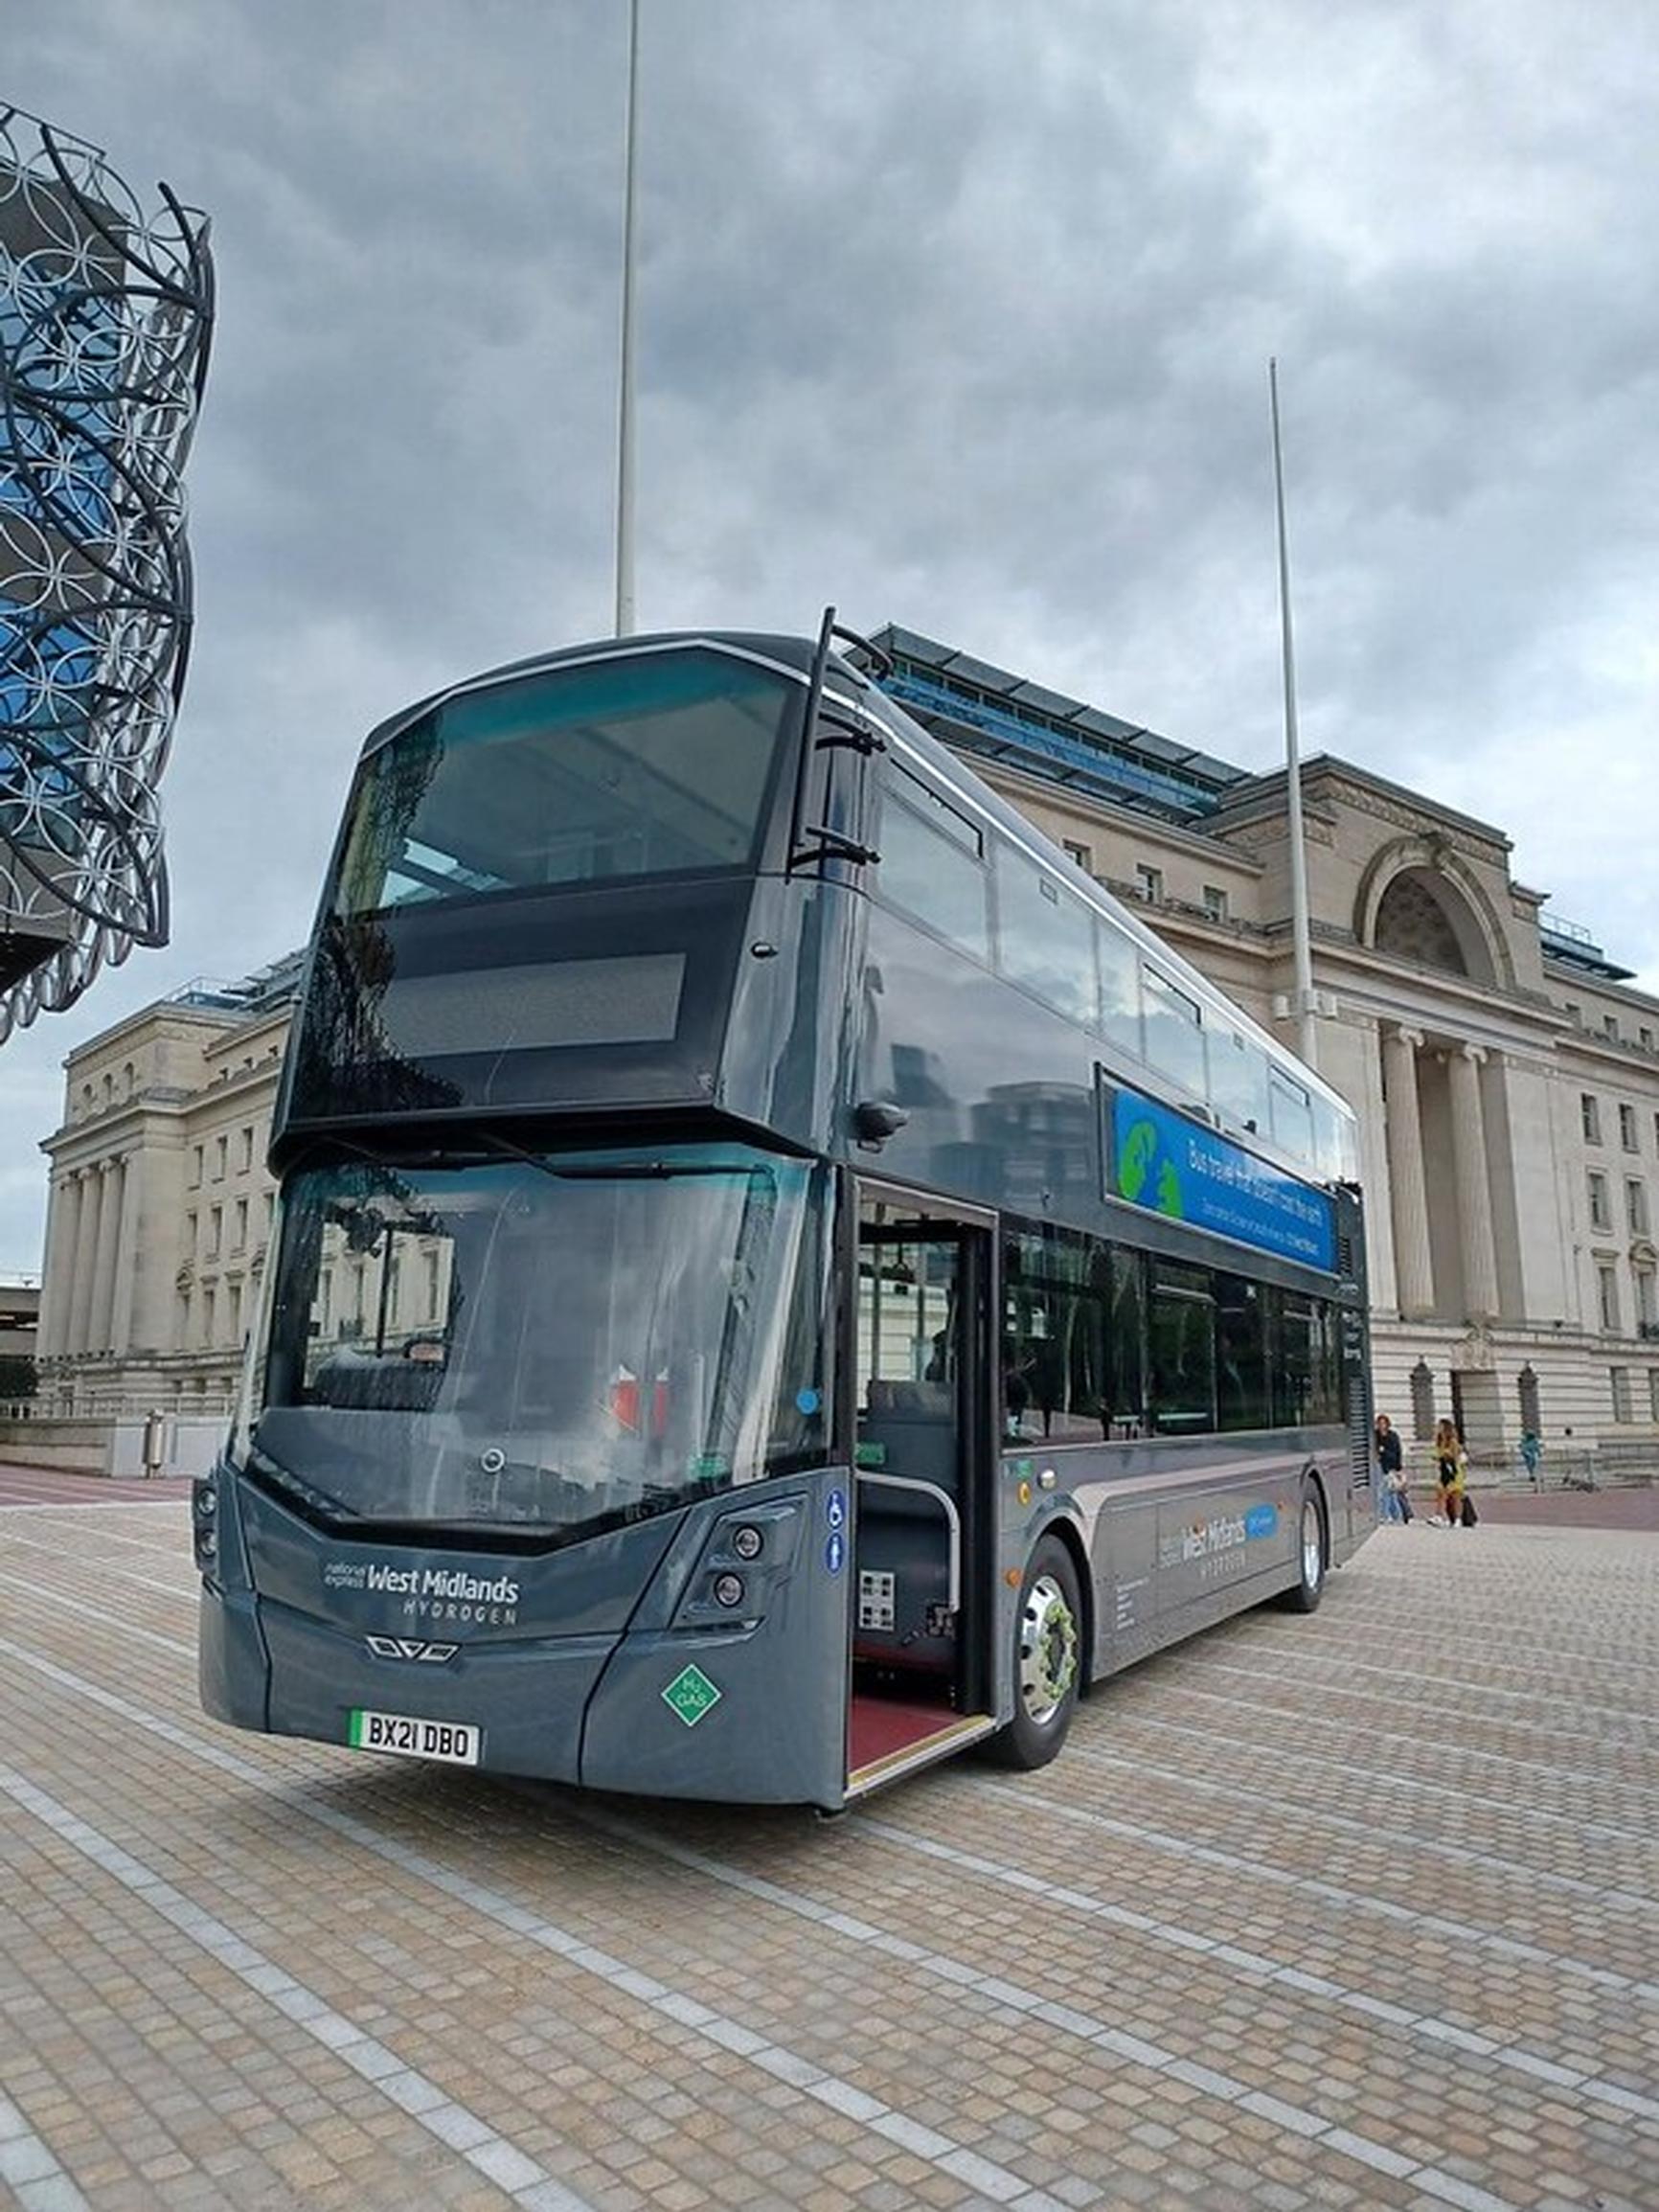 The fleet has been manufactured by Wrightbus